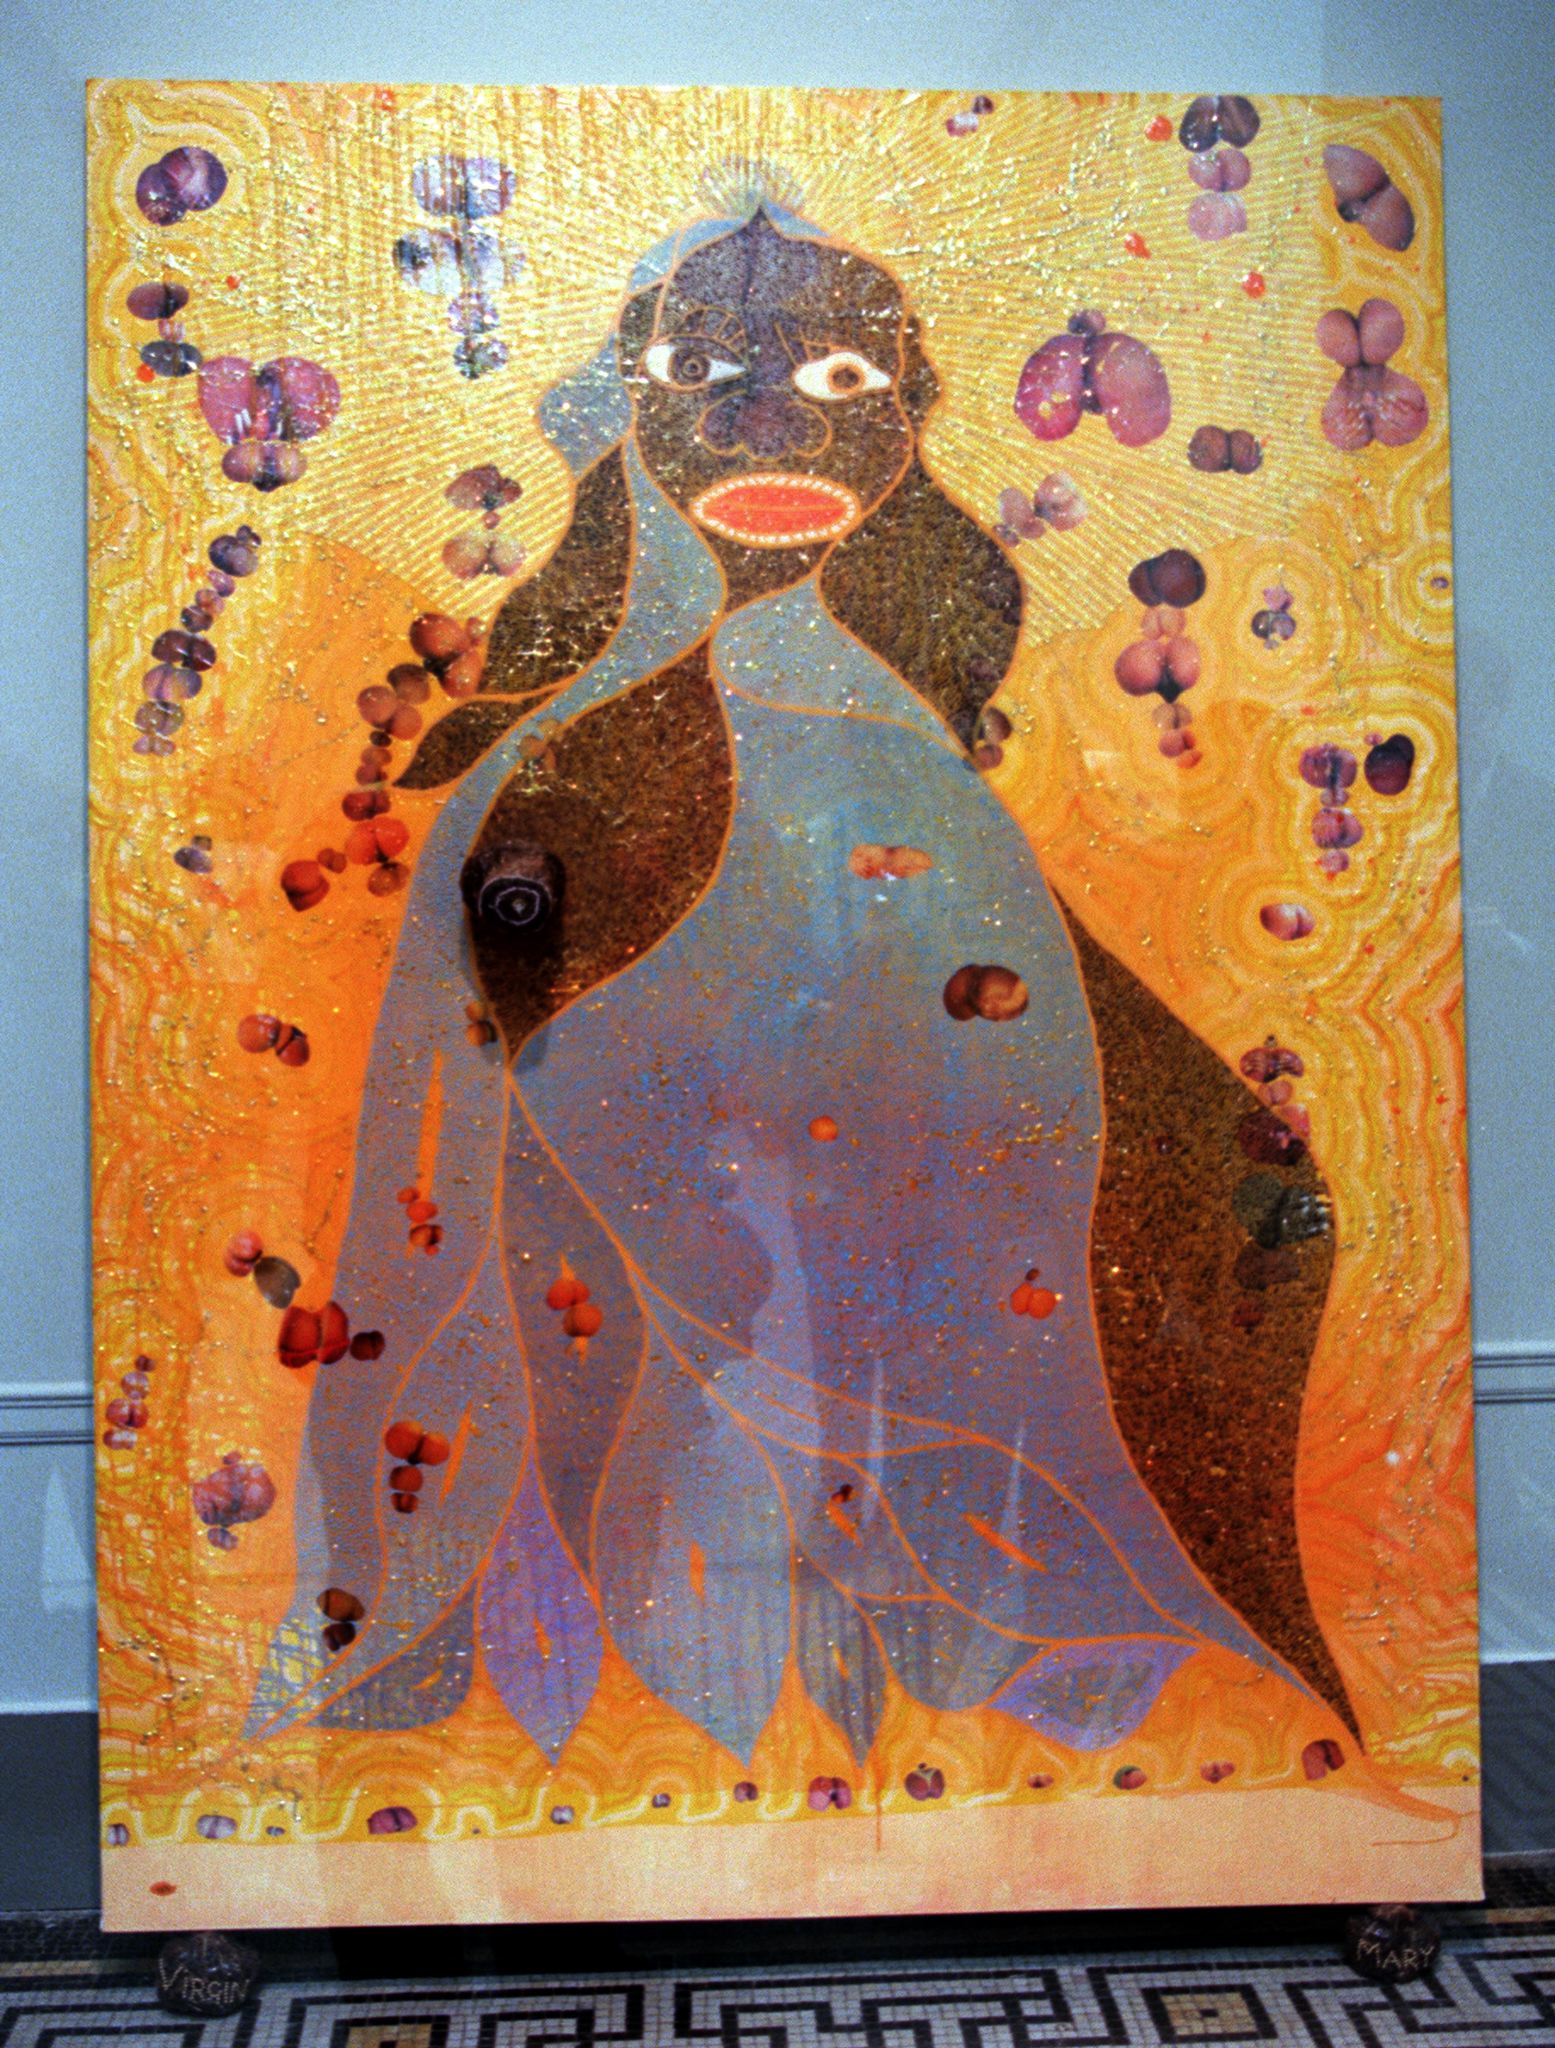 Artist Chris Ofili's controversial work "The Holy Virgin Mary" is seen in the Brooklyn Museum of Art as part of the Sensation exhibit in New York 30 September 1999. (Doug Kanter&amp;mdash;AFP/Getty Images)